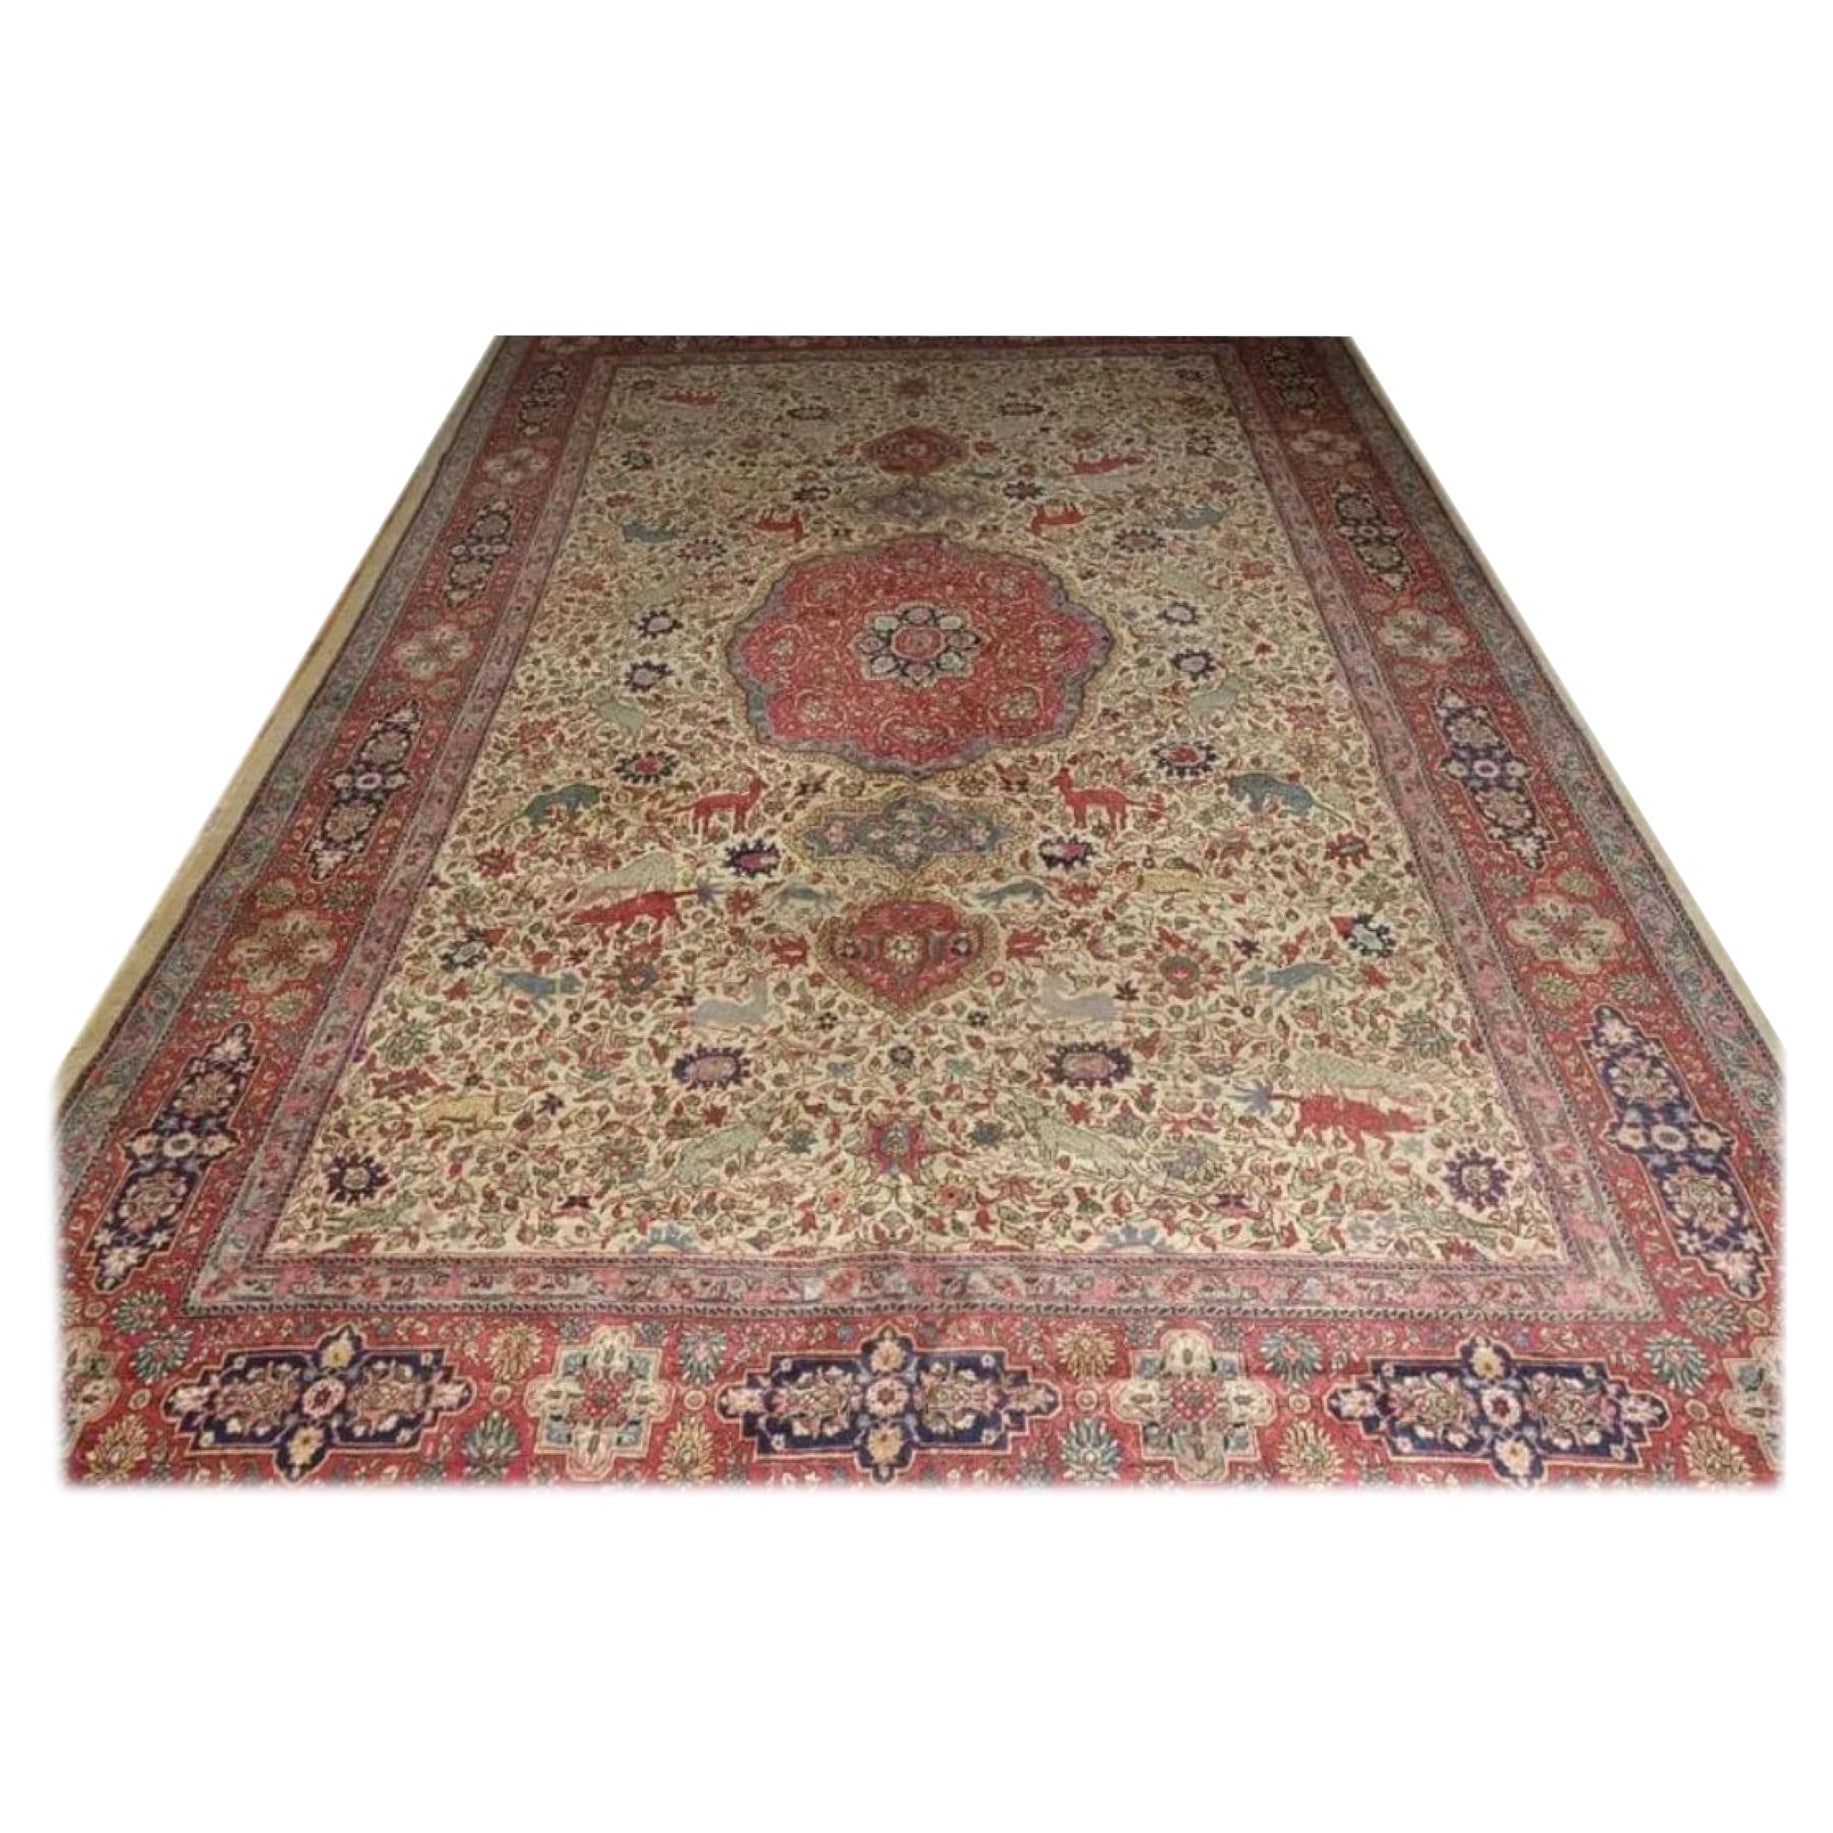 How much are authentic Persian rugs?